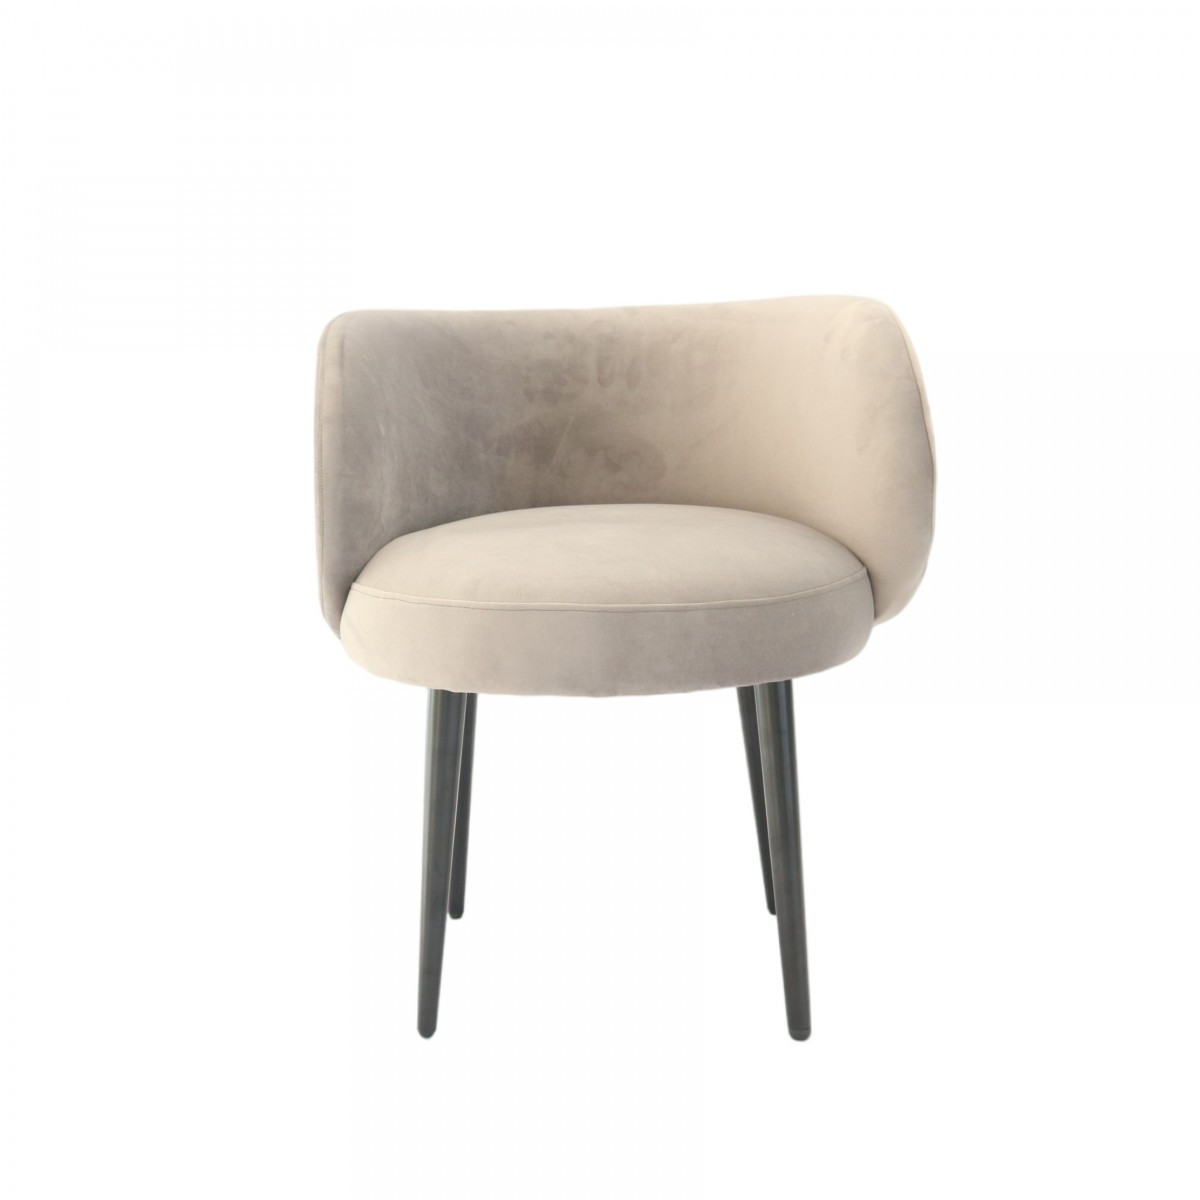 "24"" Grey Velvet And Black Solid Color Arm Chair"